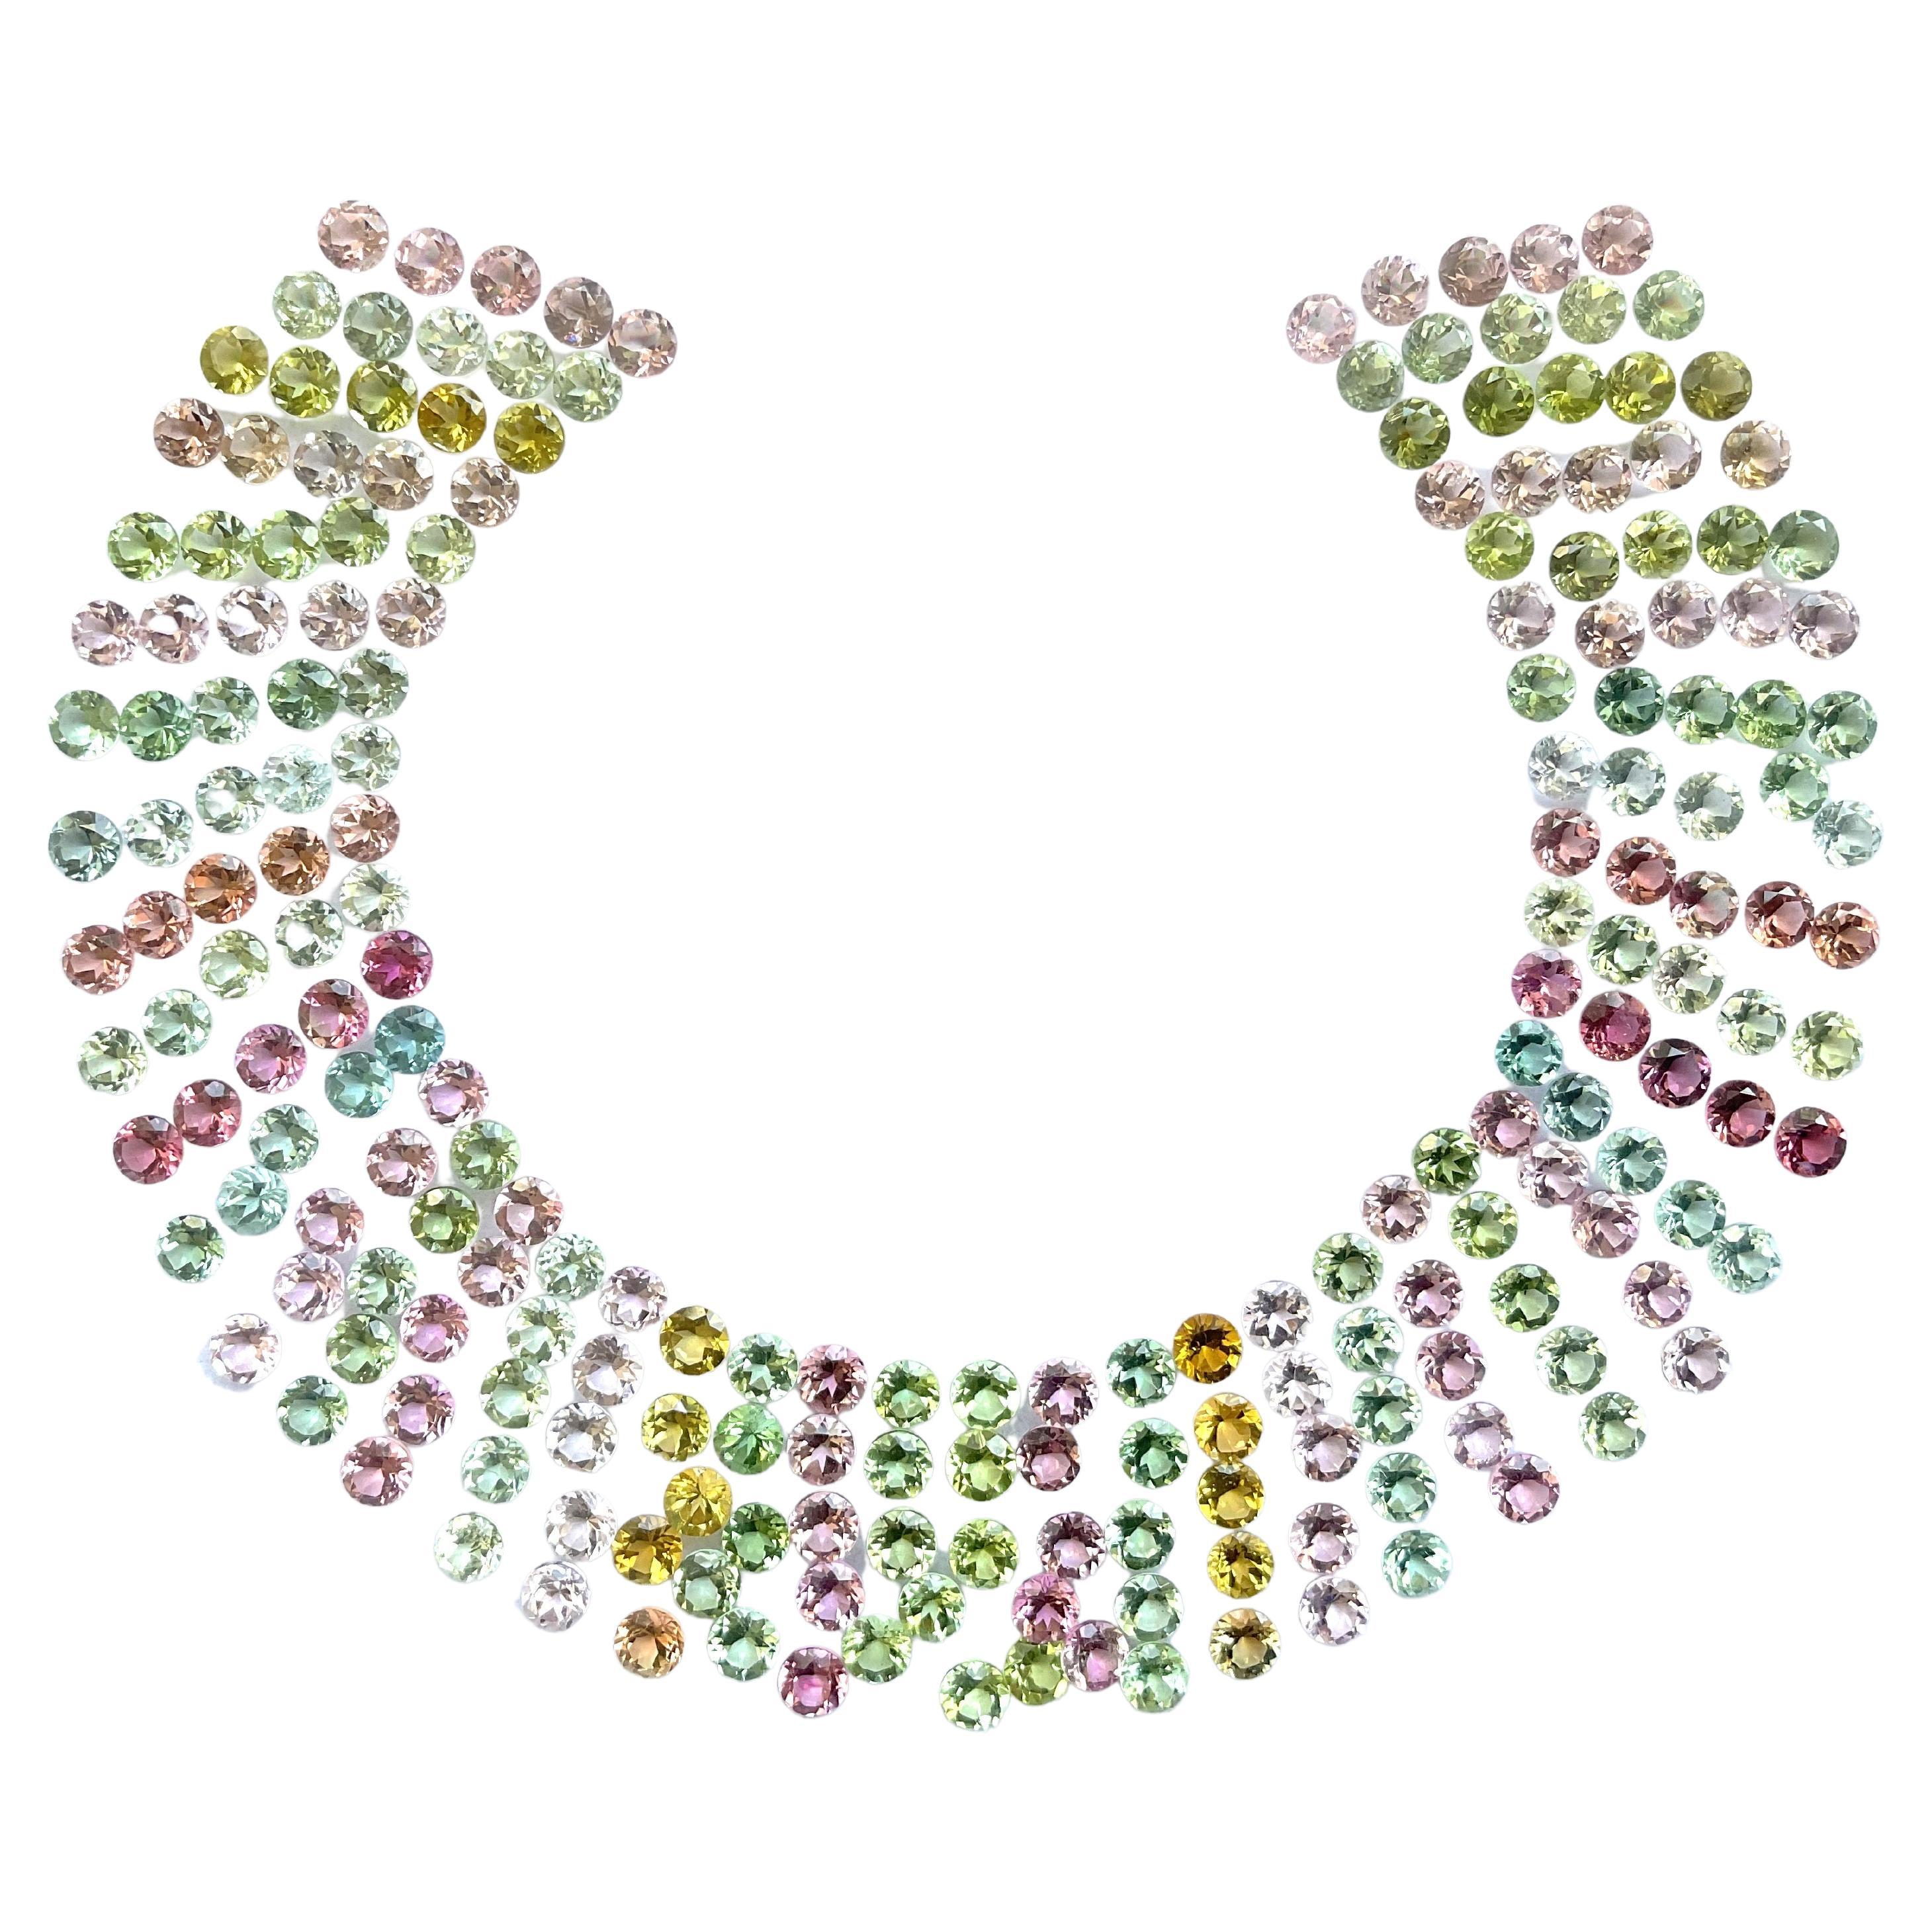 57.45 Carats Round Tourmaline Layout Suite Faceted Cut Stones Natural Gems For Sale